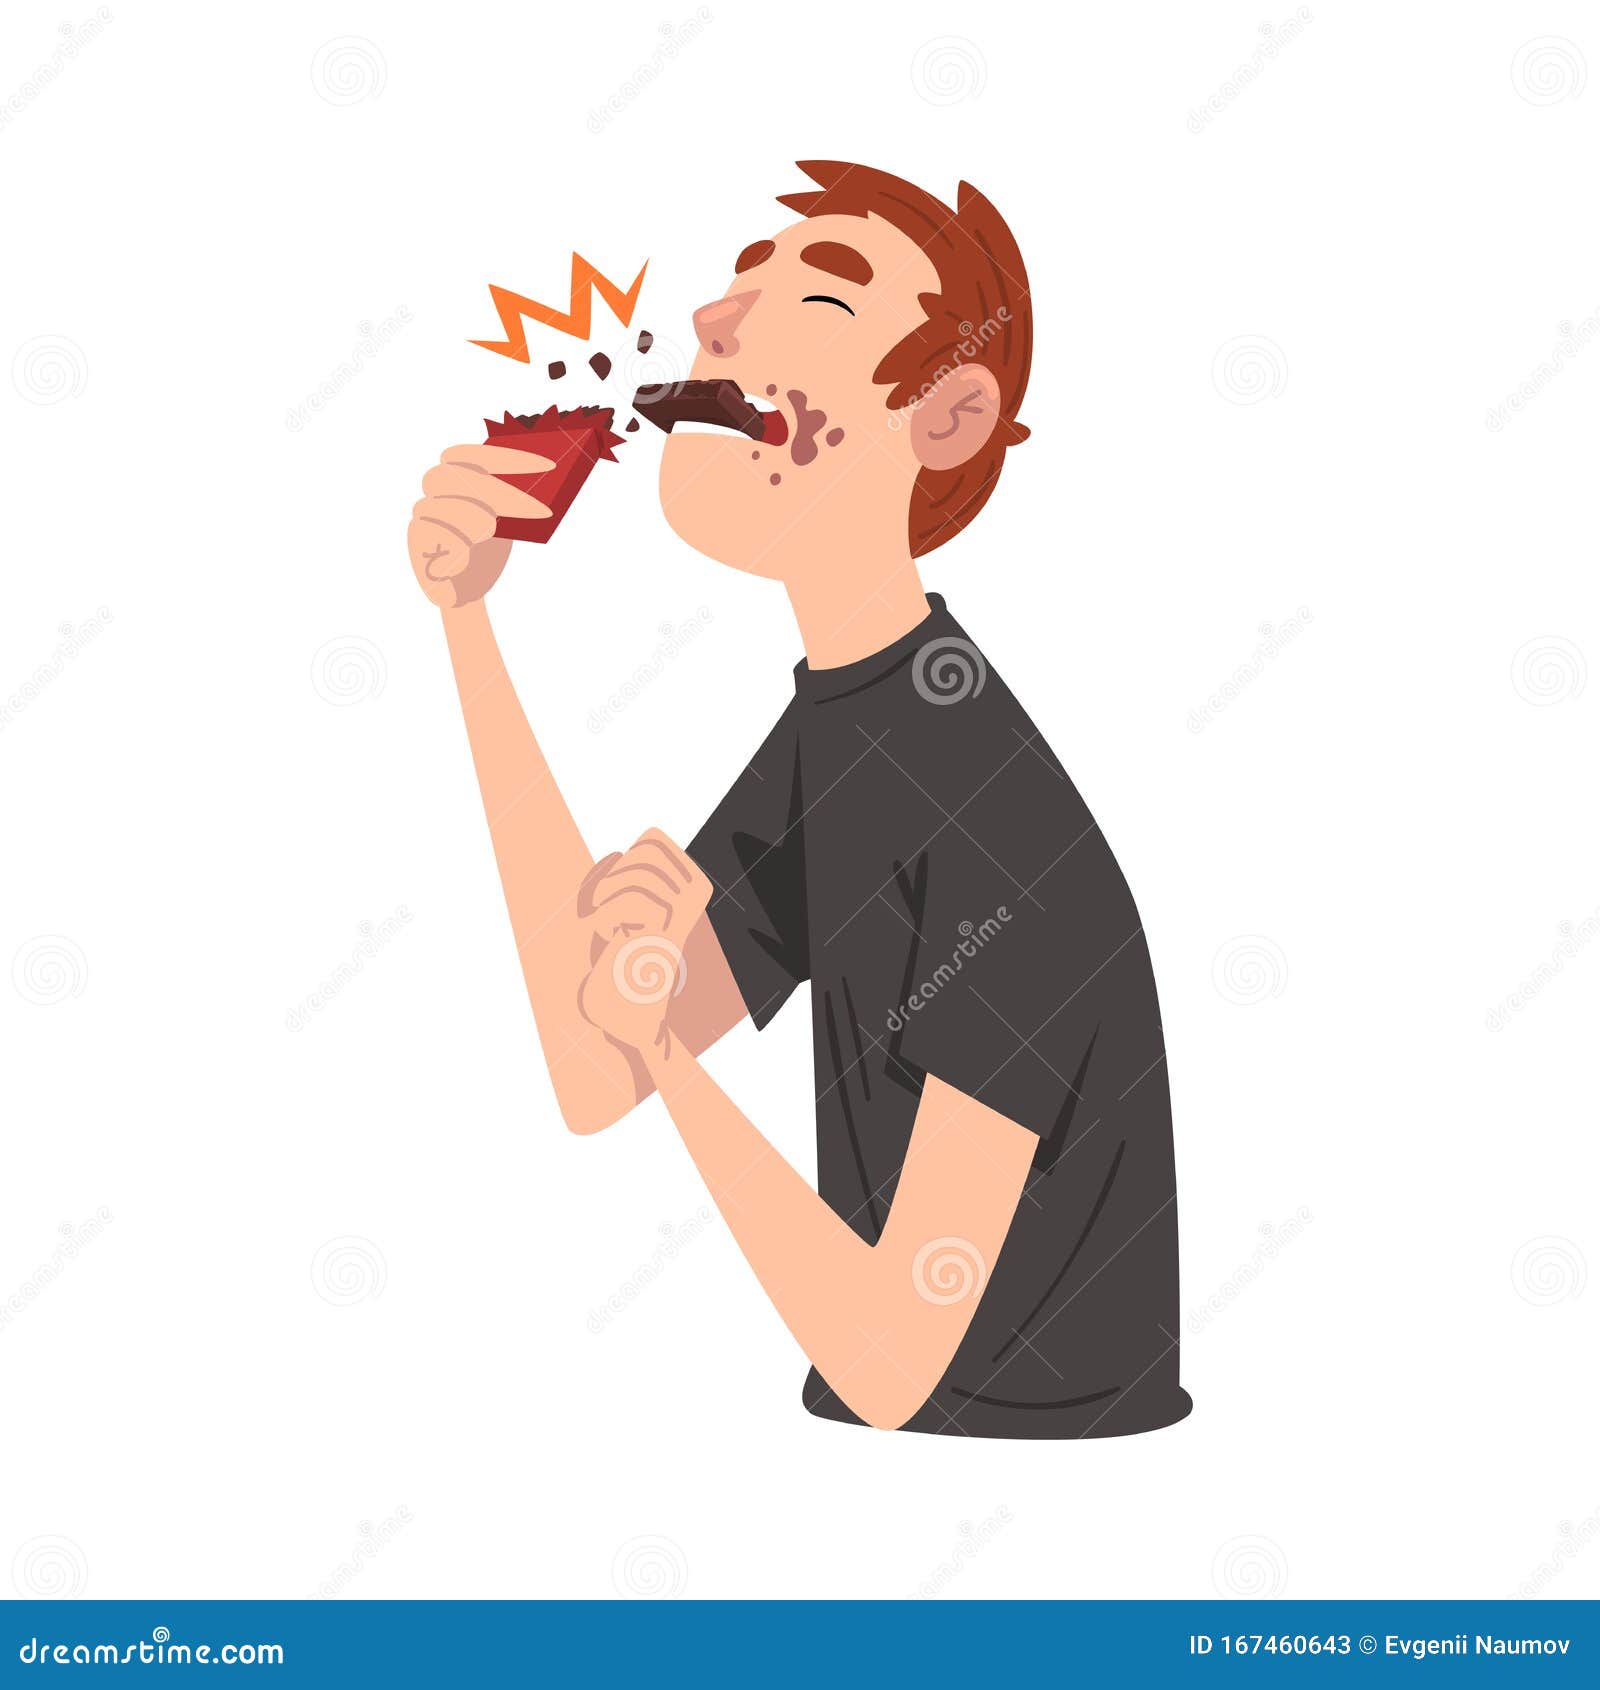 Guy Eating Chocolate, Funny Man Cartoon Character Enjoying Eating Sweets  Vector Illustration Stock Vector - Illustration of delicious, crunch:  167460643